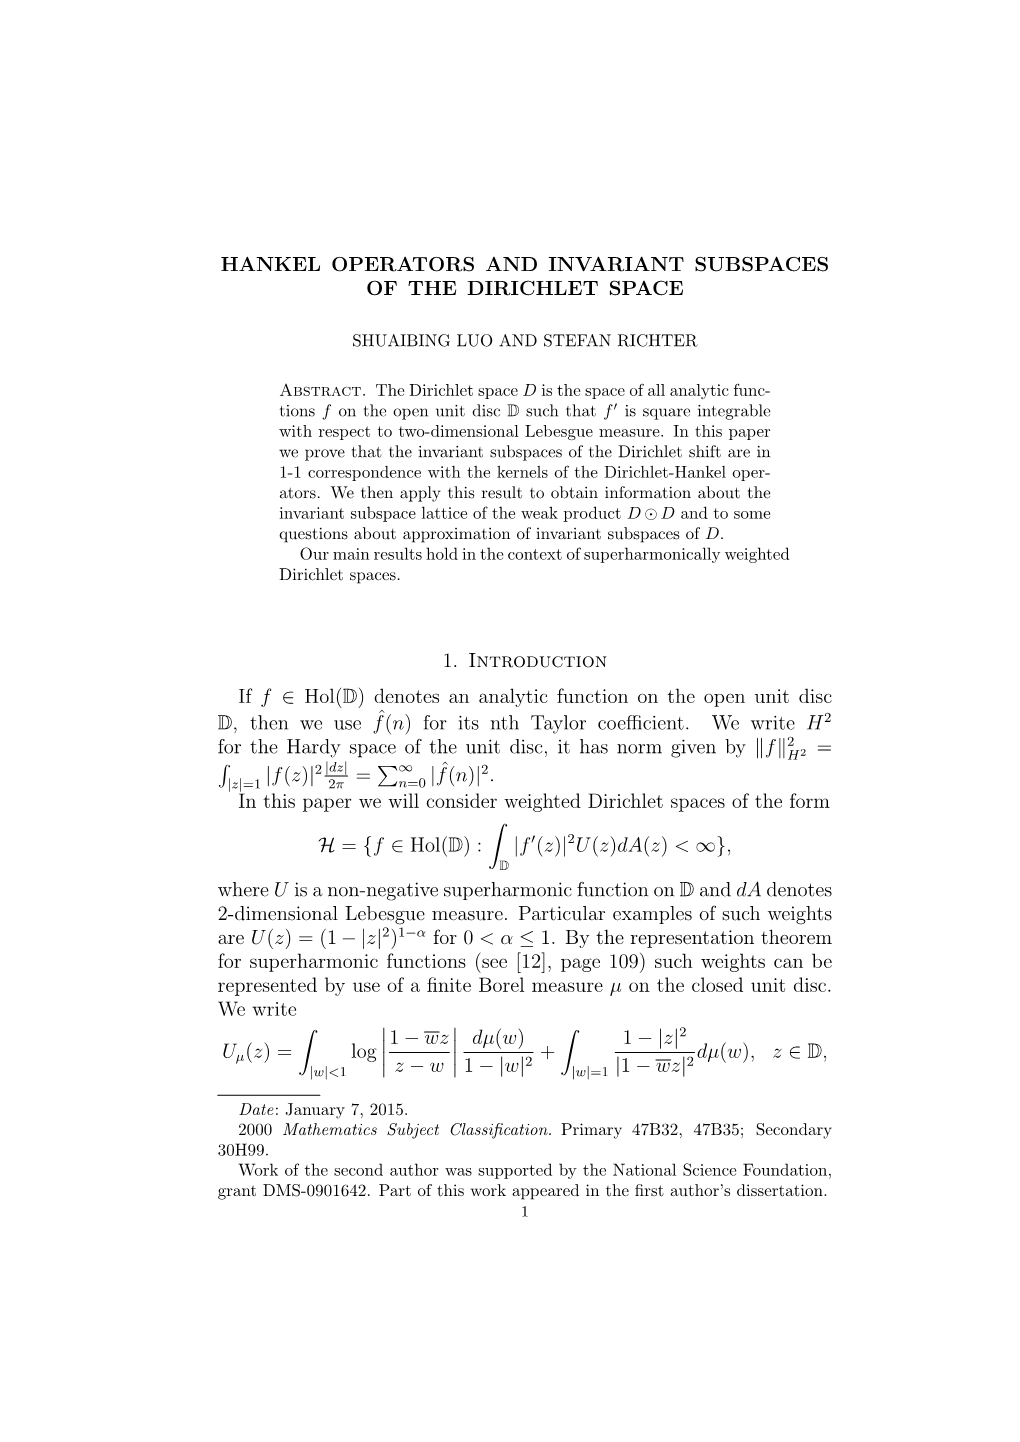 Hankel Operators and Invariant Subspaces of the Dirichlet Space